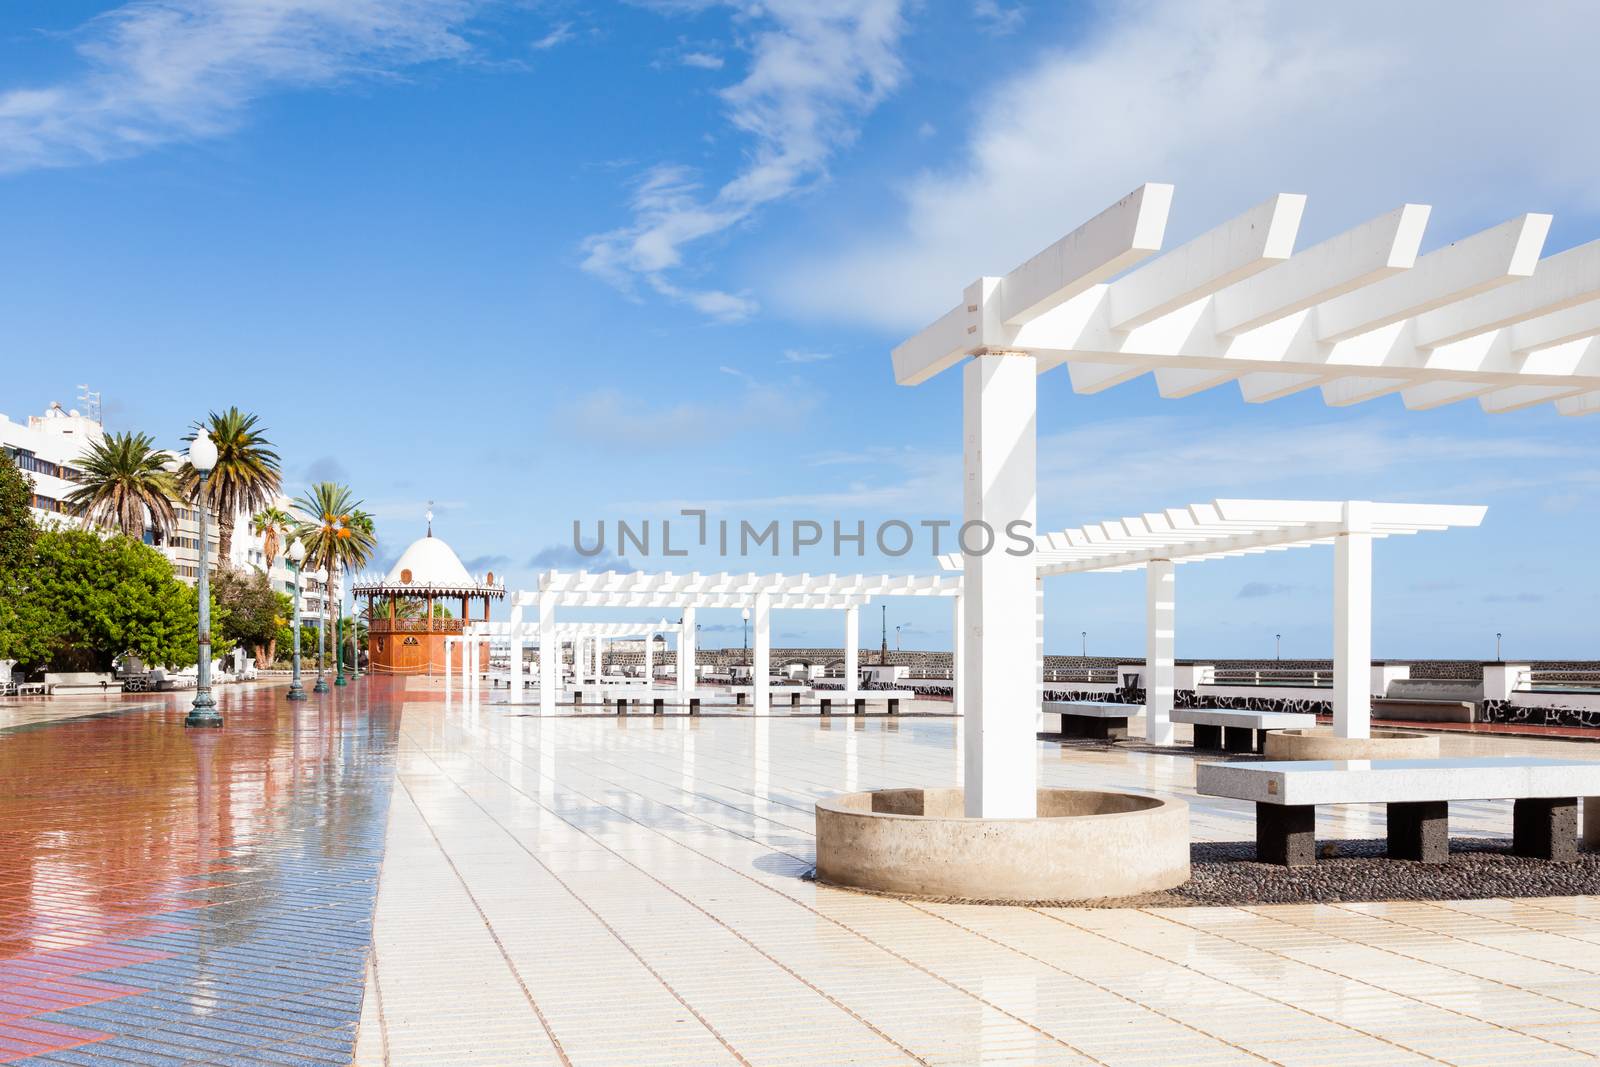 Arrecife Waterfront by ATGImages